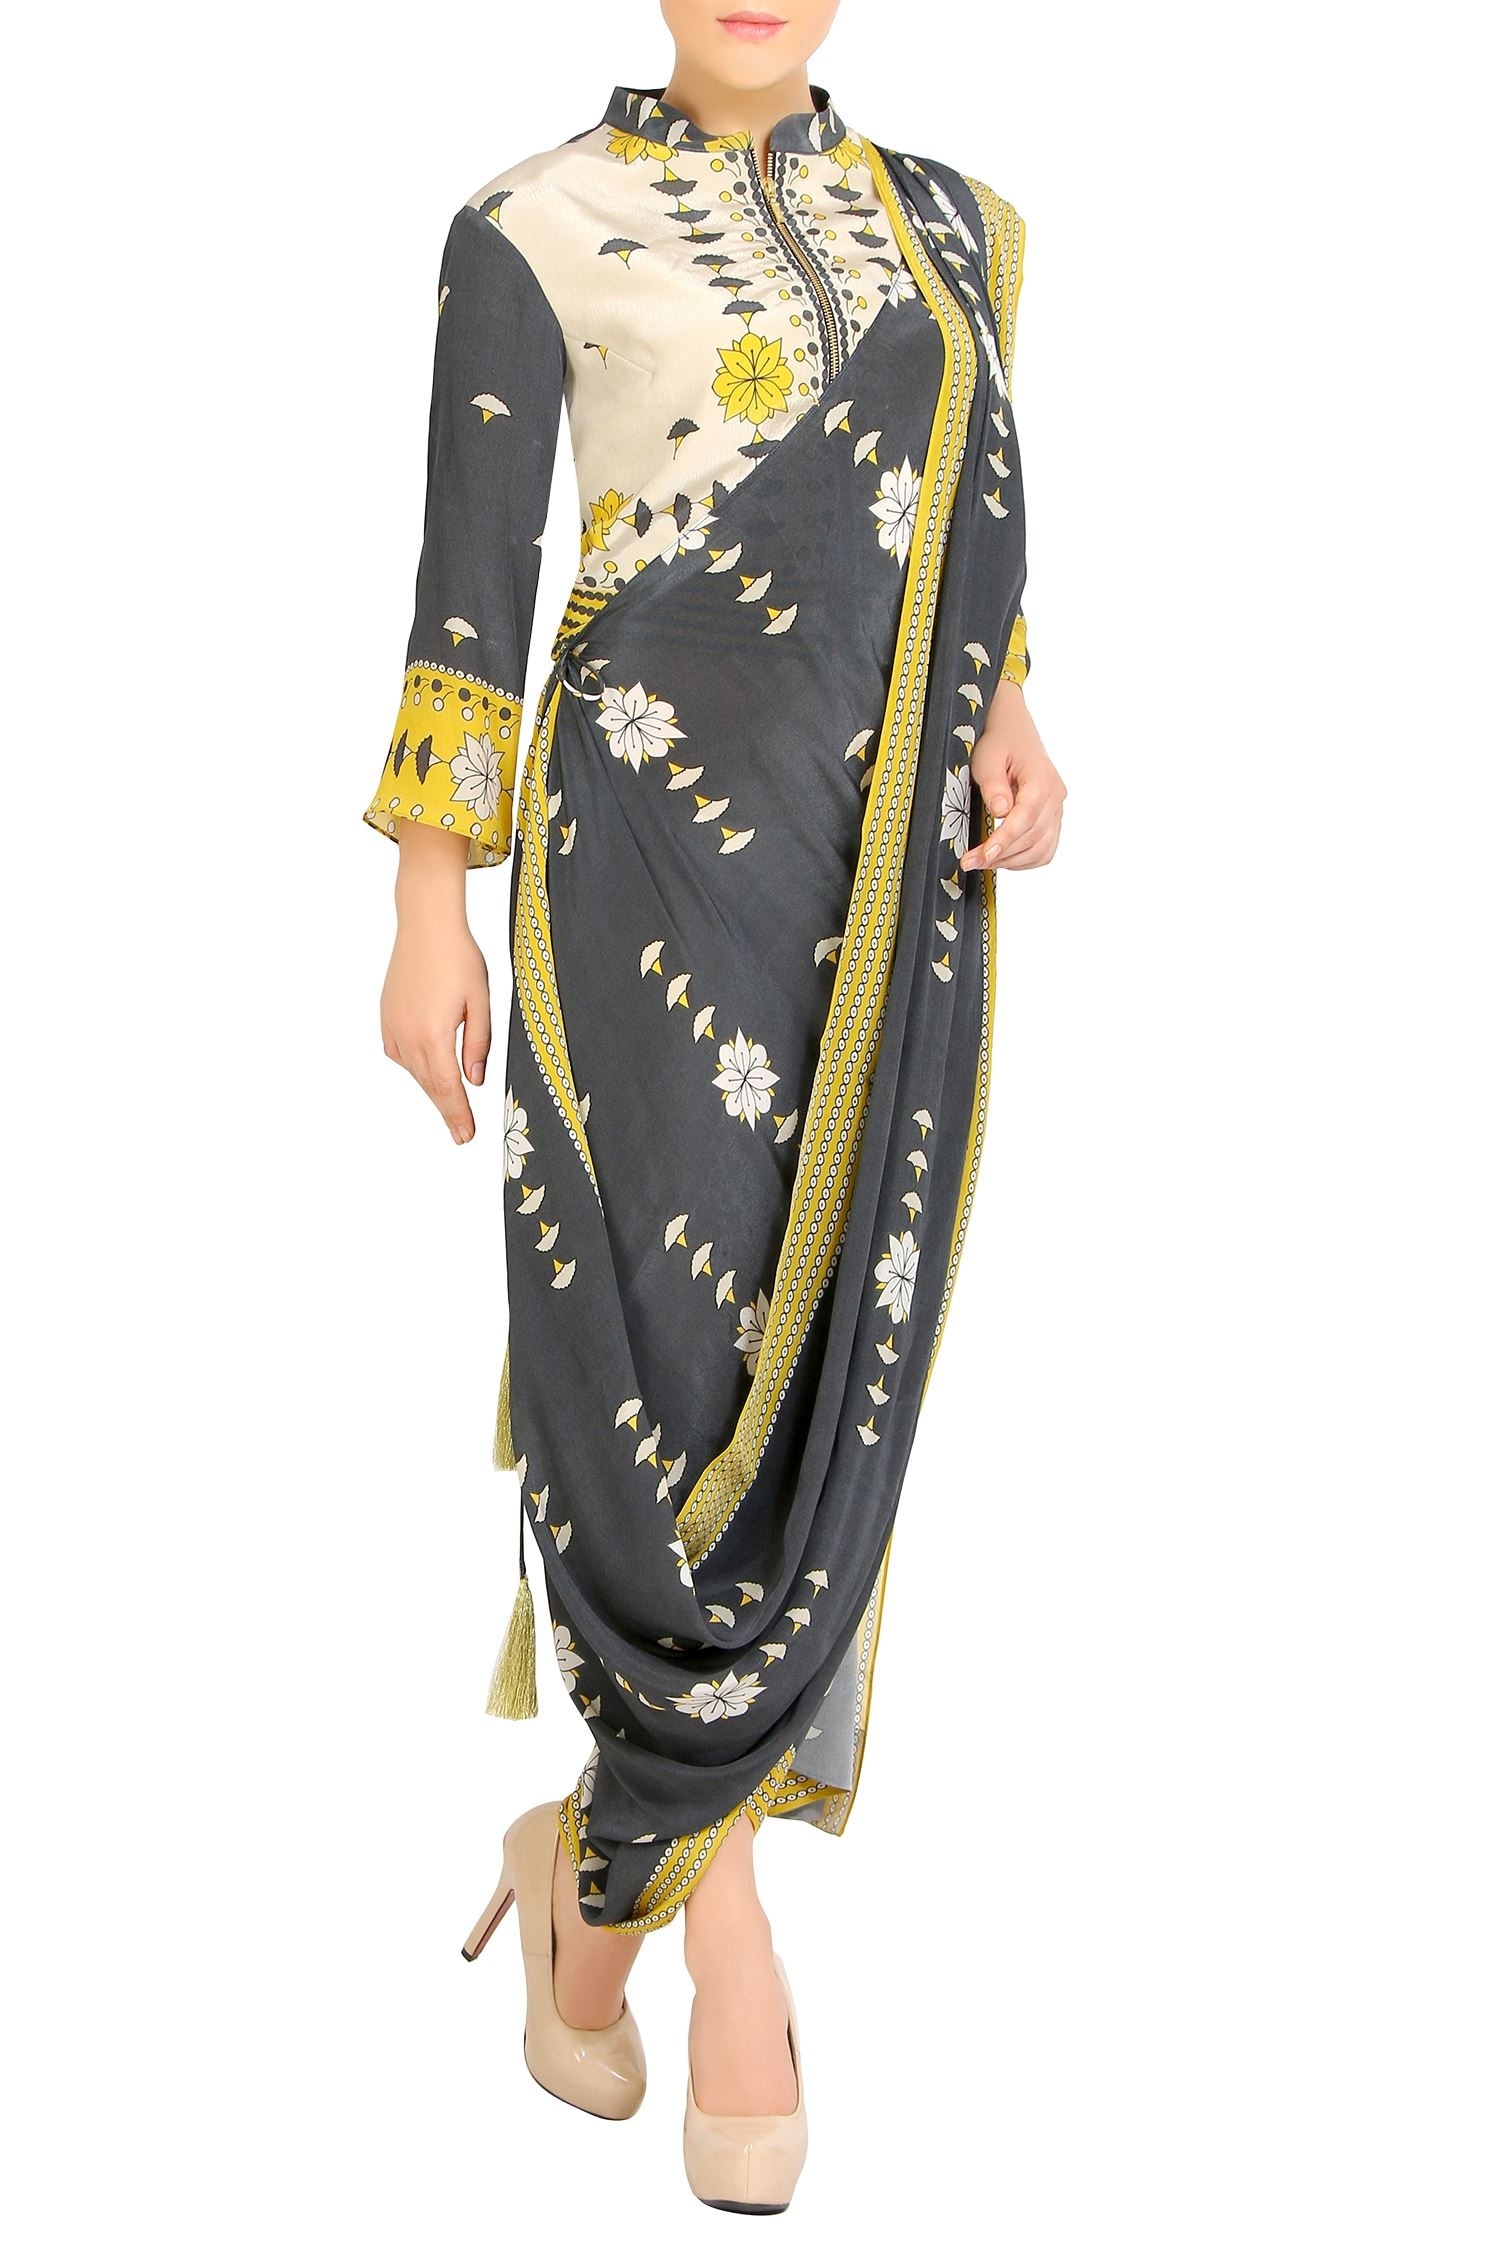 Soup by Sougat Paul Yellow Charcoal Grey And Printed Saree With Jacket For Women